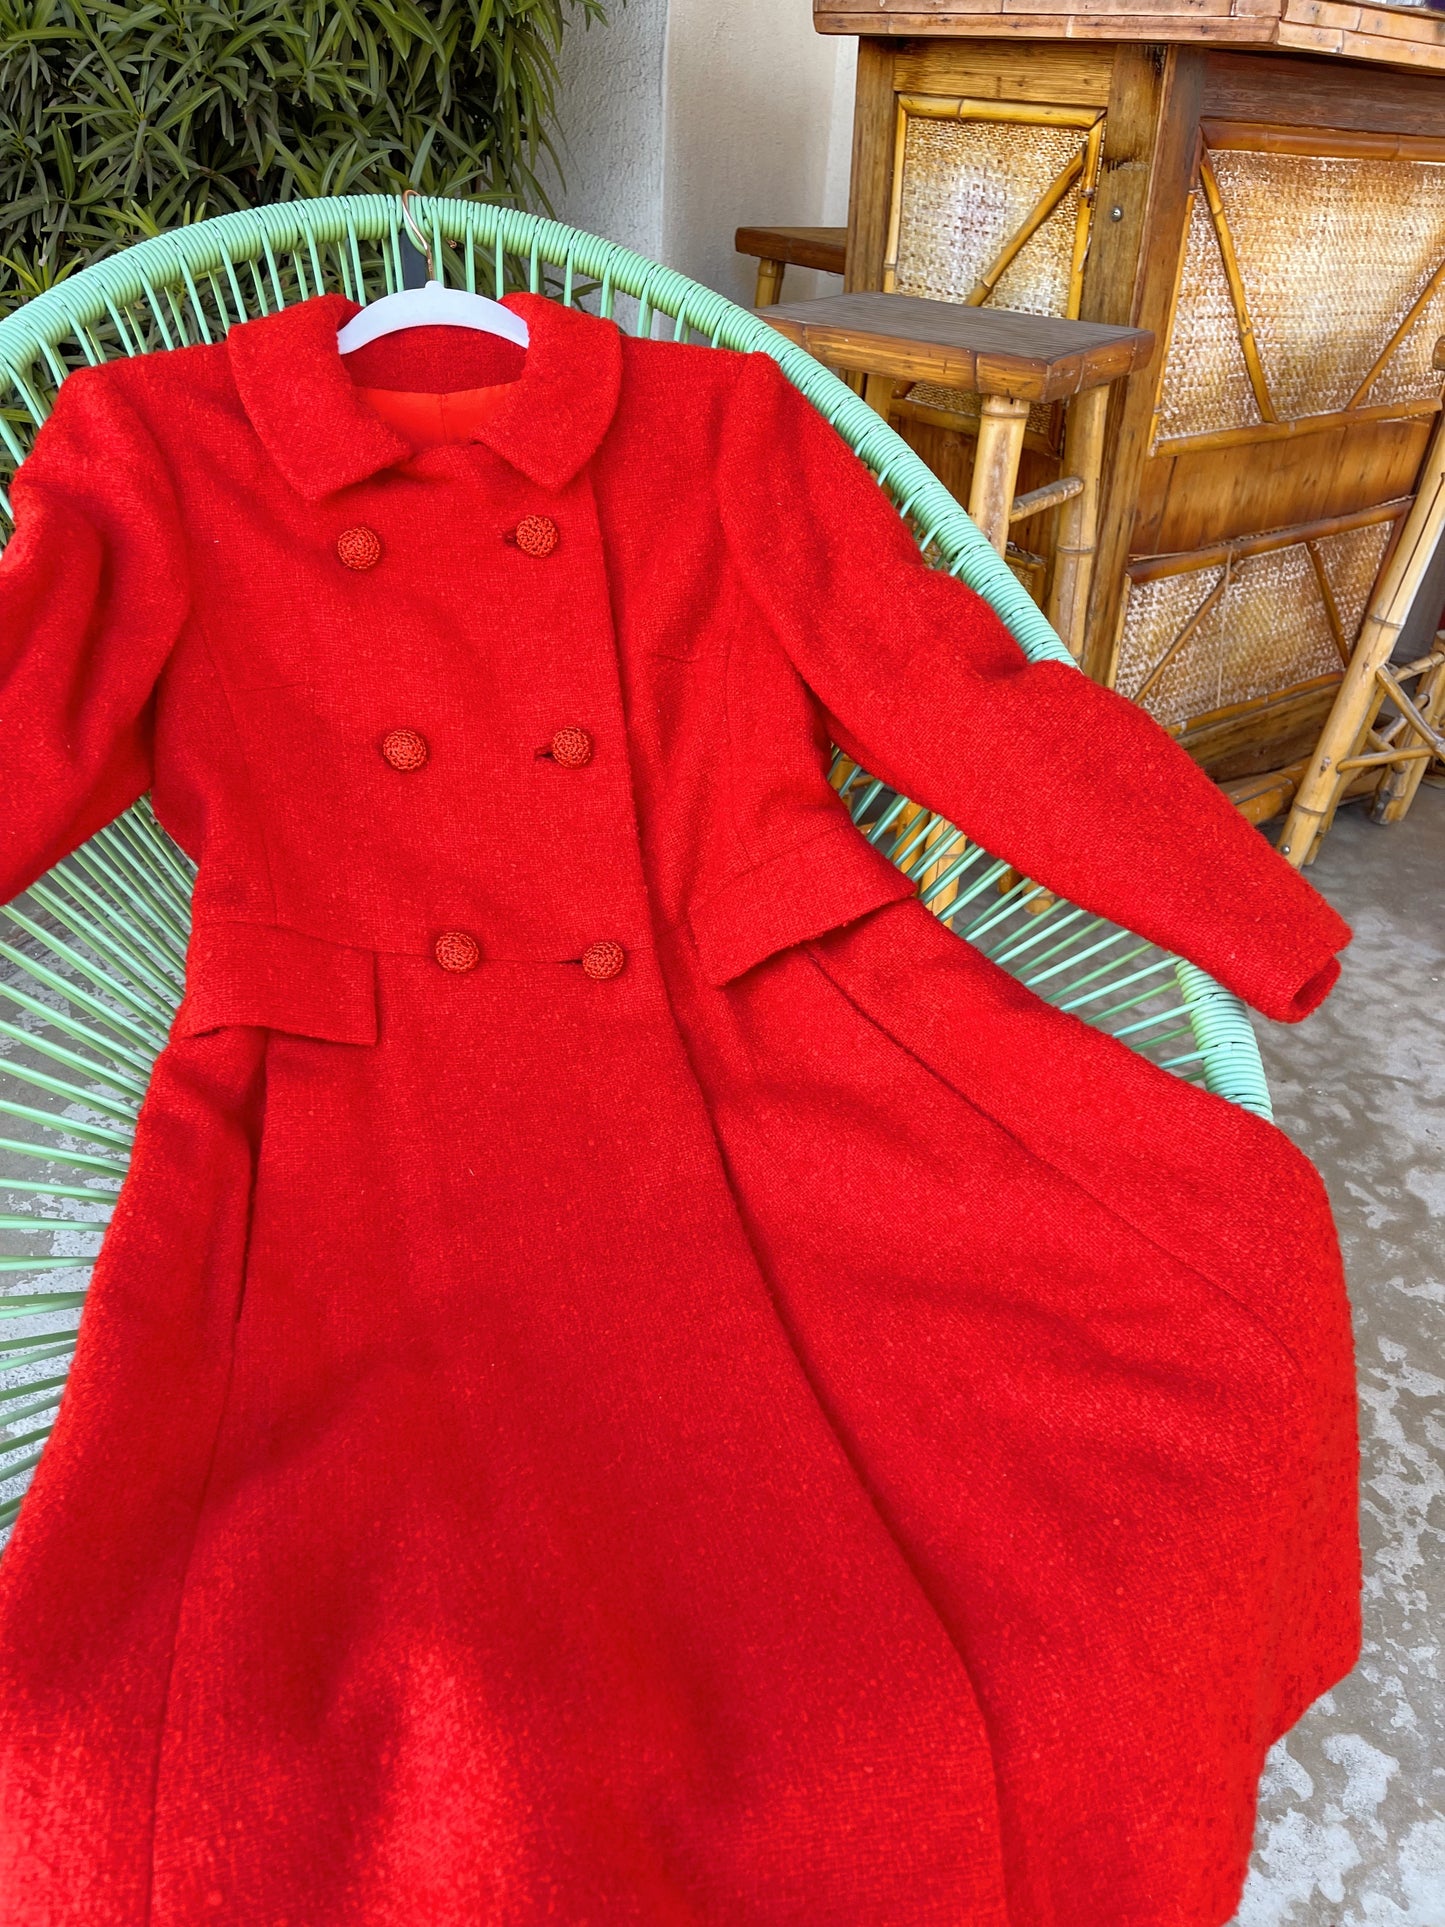 Vintage 60s / 70s Candy Apple Tweed Double Breasted Coat Fits Sizes S-M